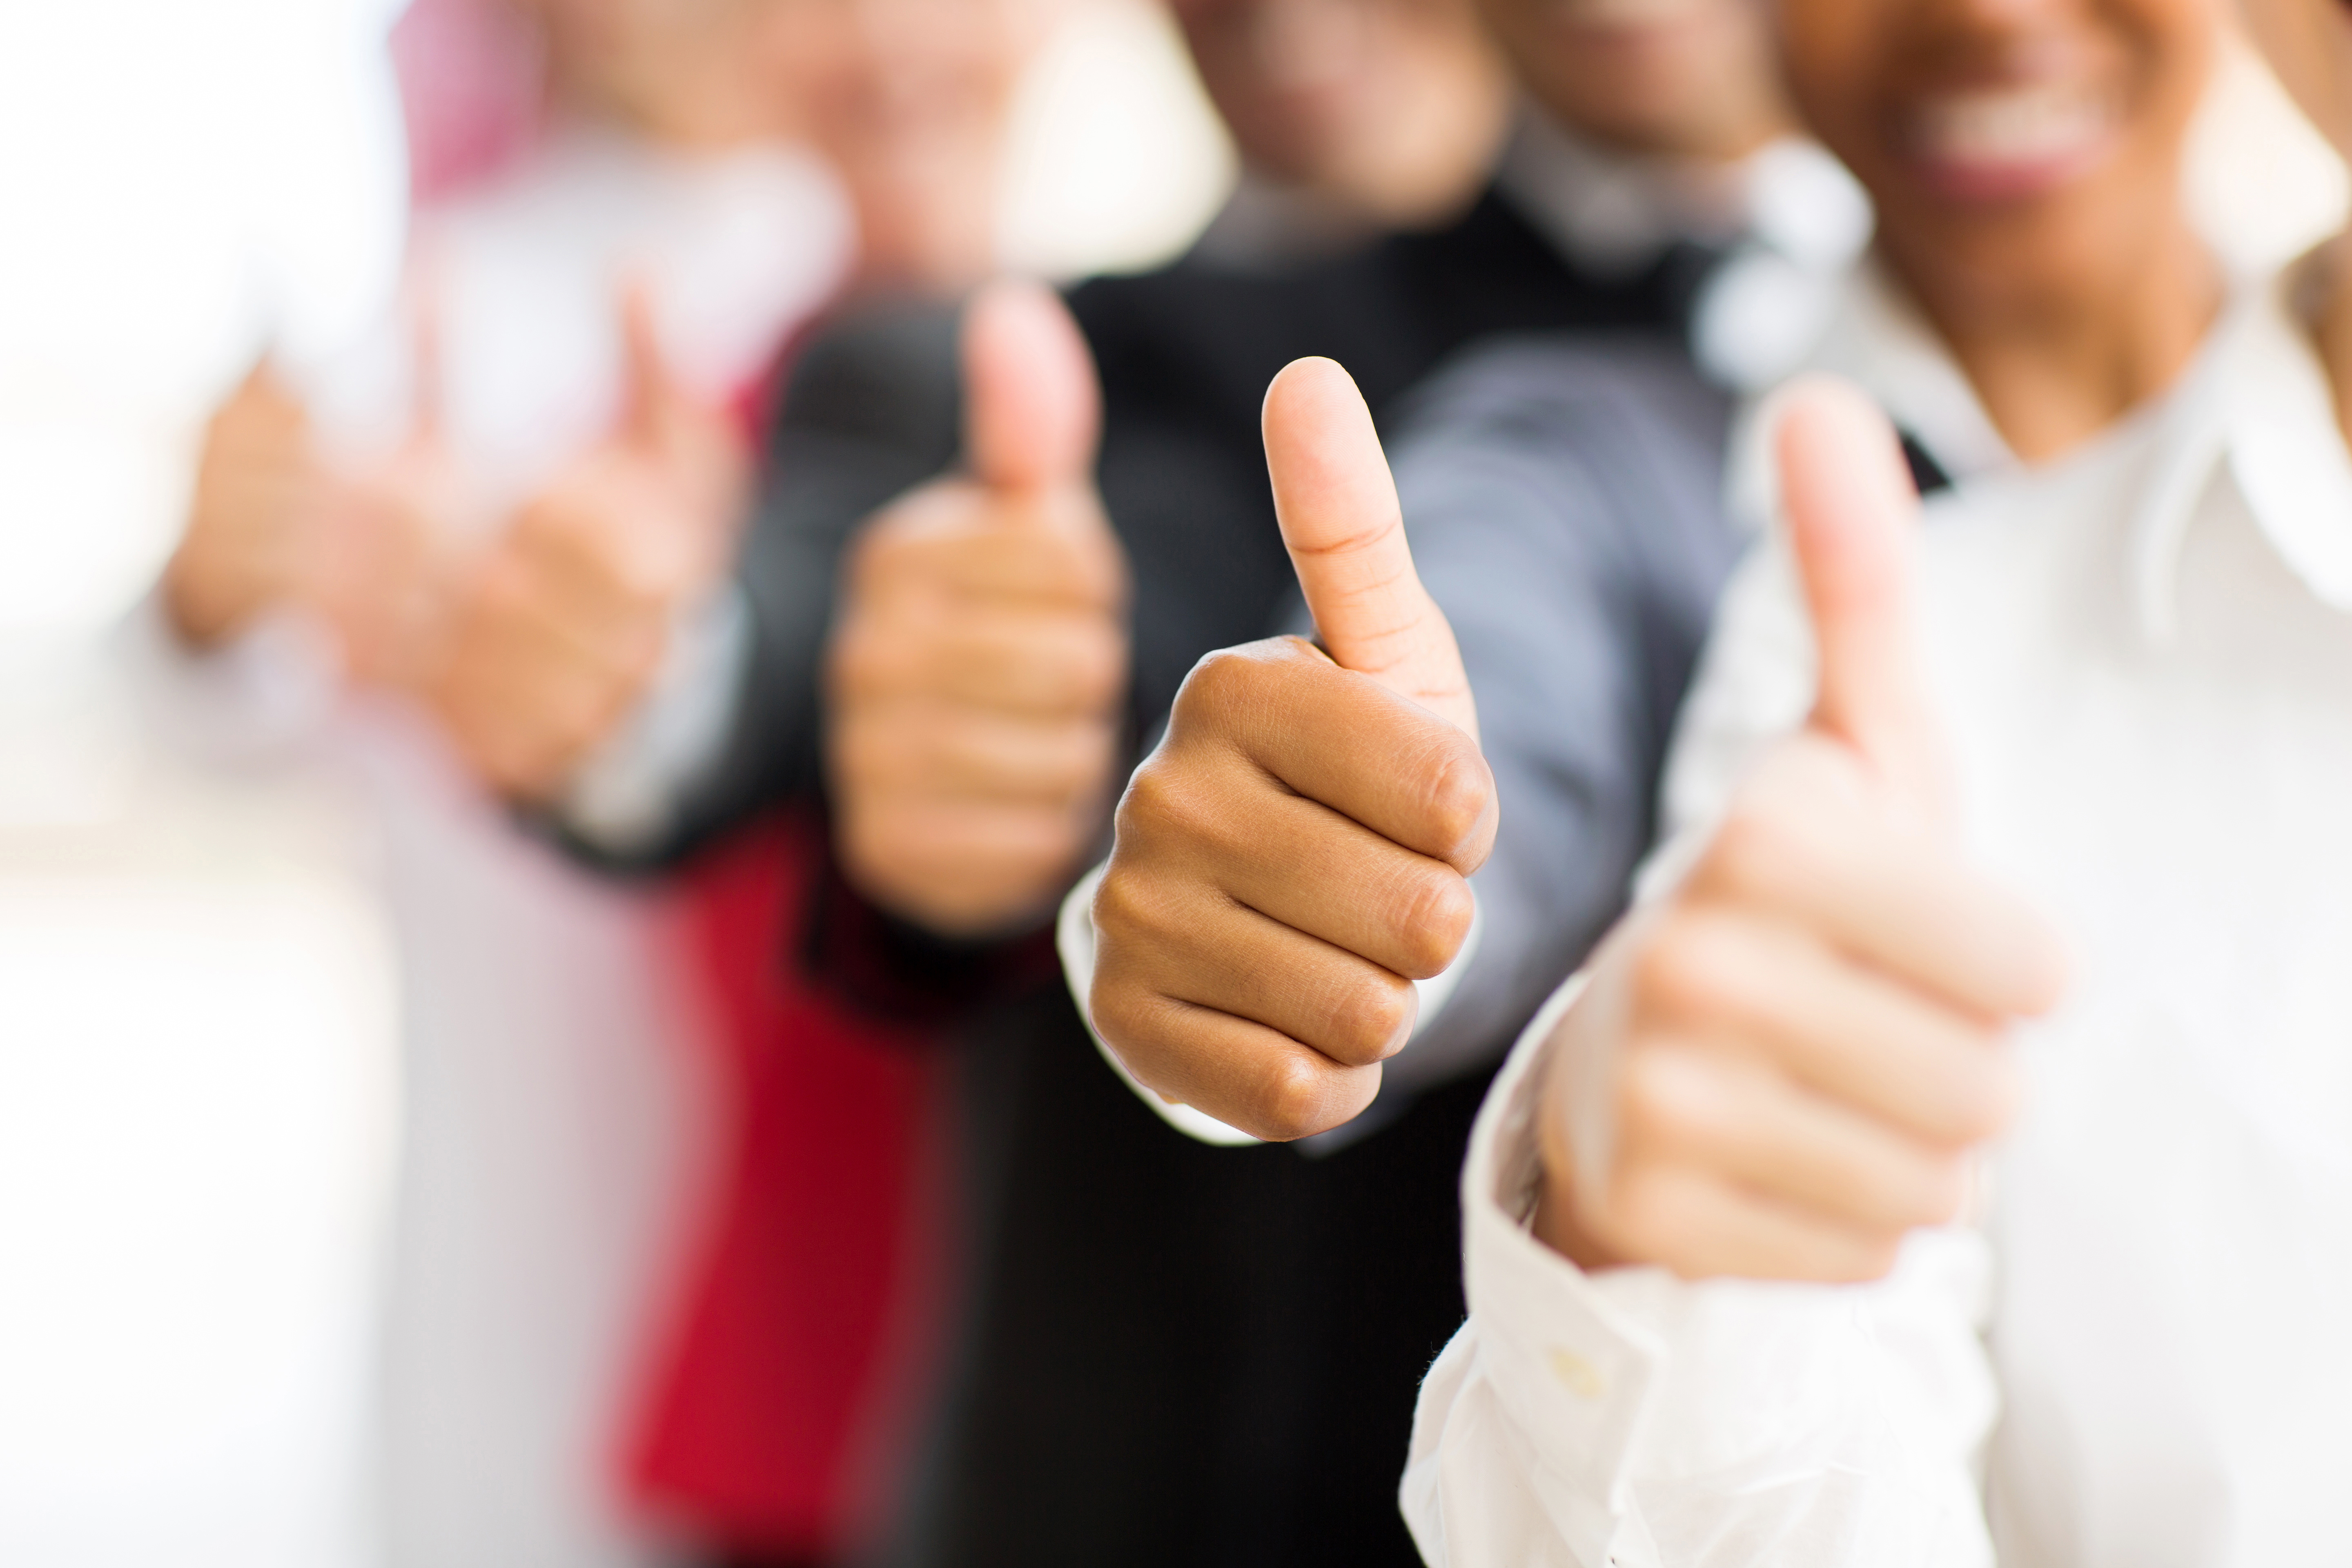 closeup portrait of business people giving thumbs up